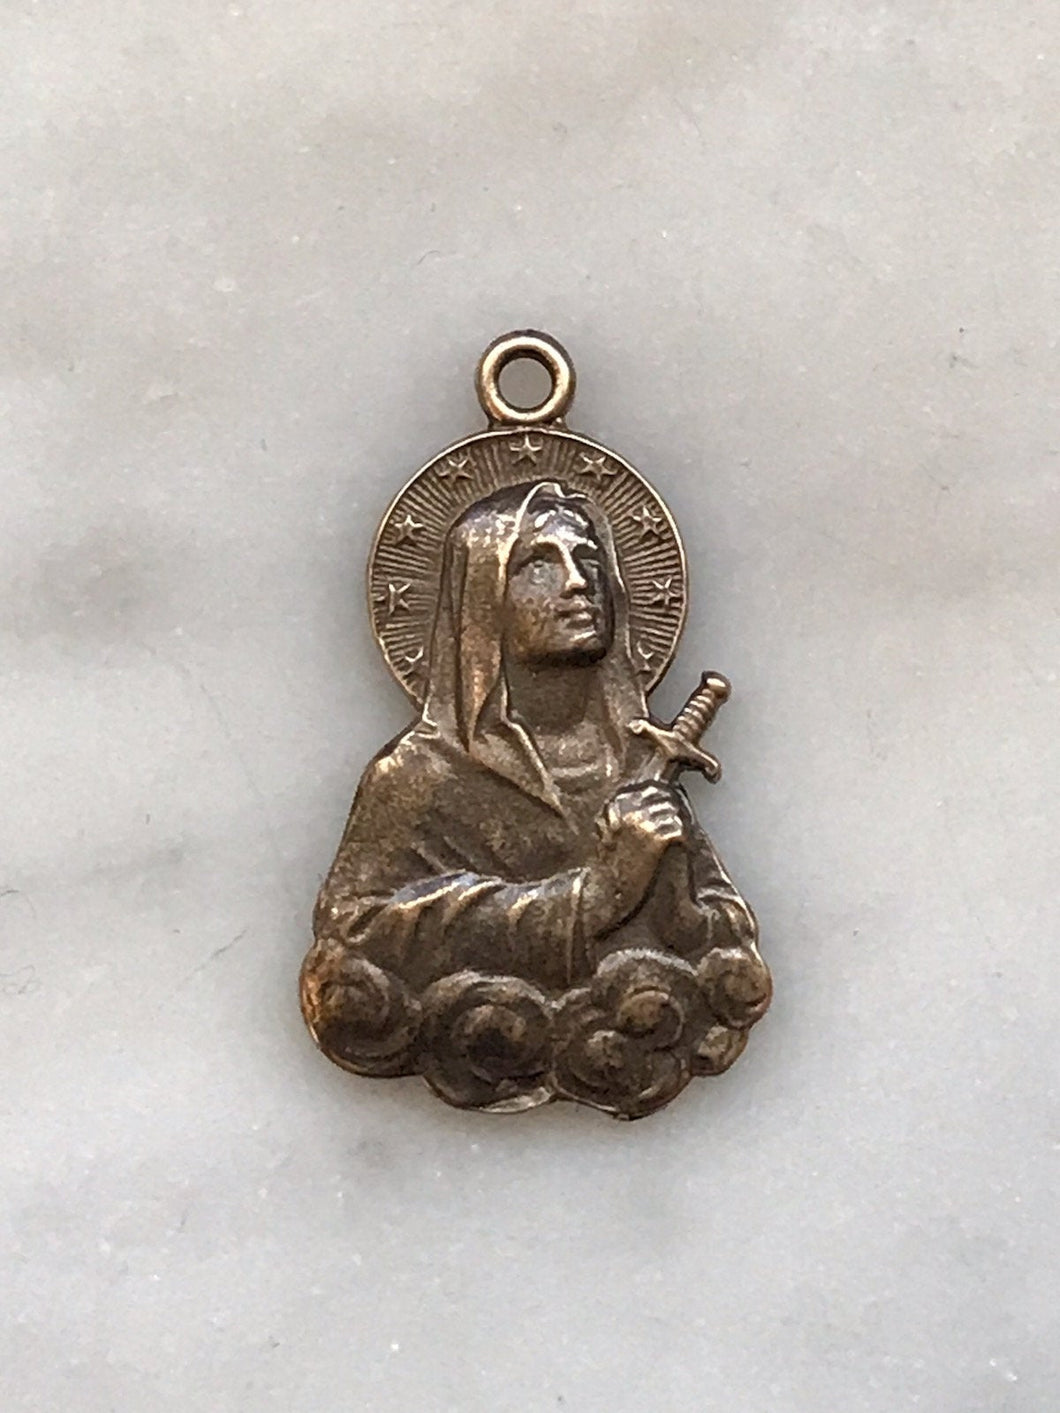 Medal - Virgin Mary with Star Studded Halo - Bronze or Sterling Silver - Antique Reproduction 1393